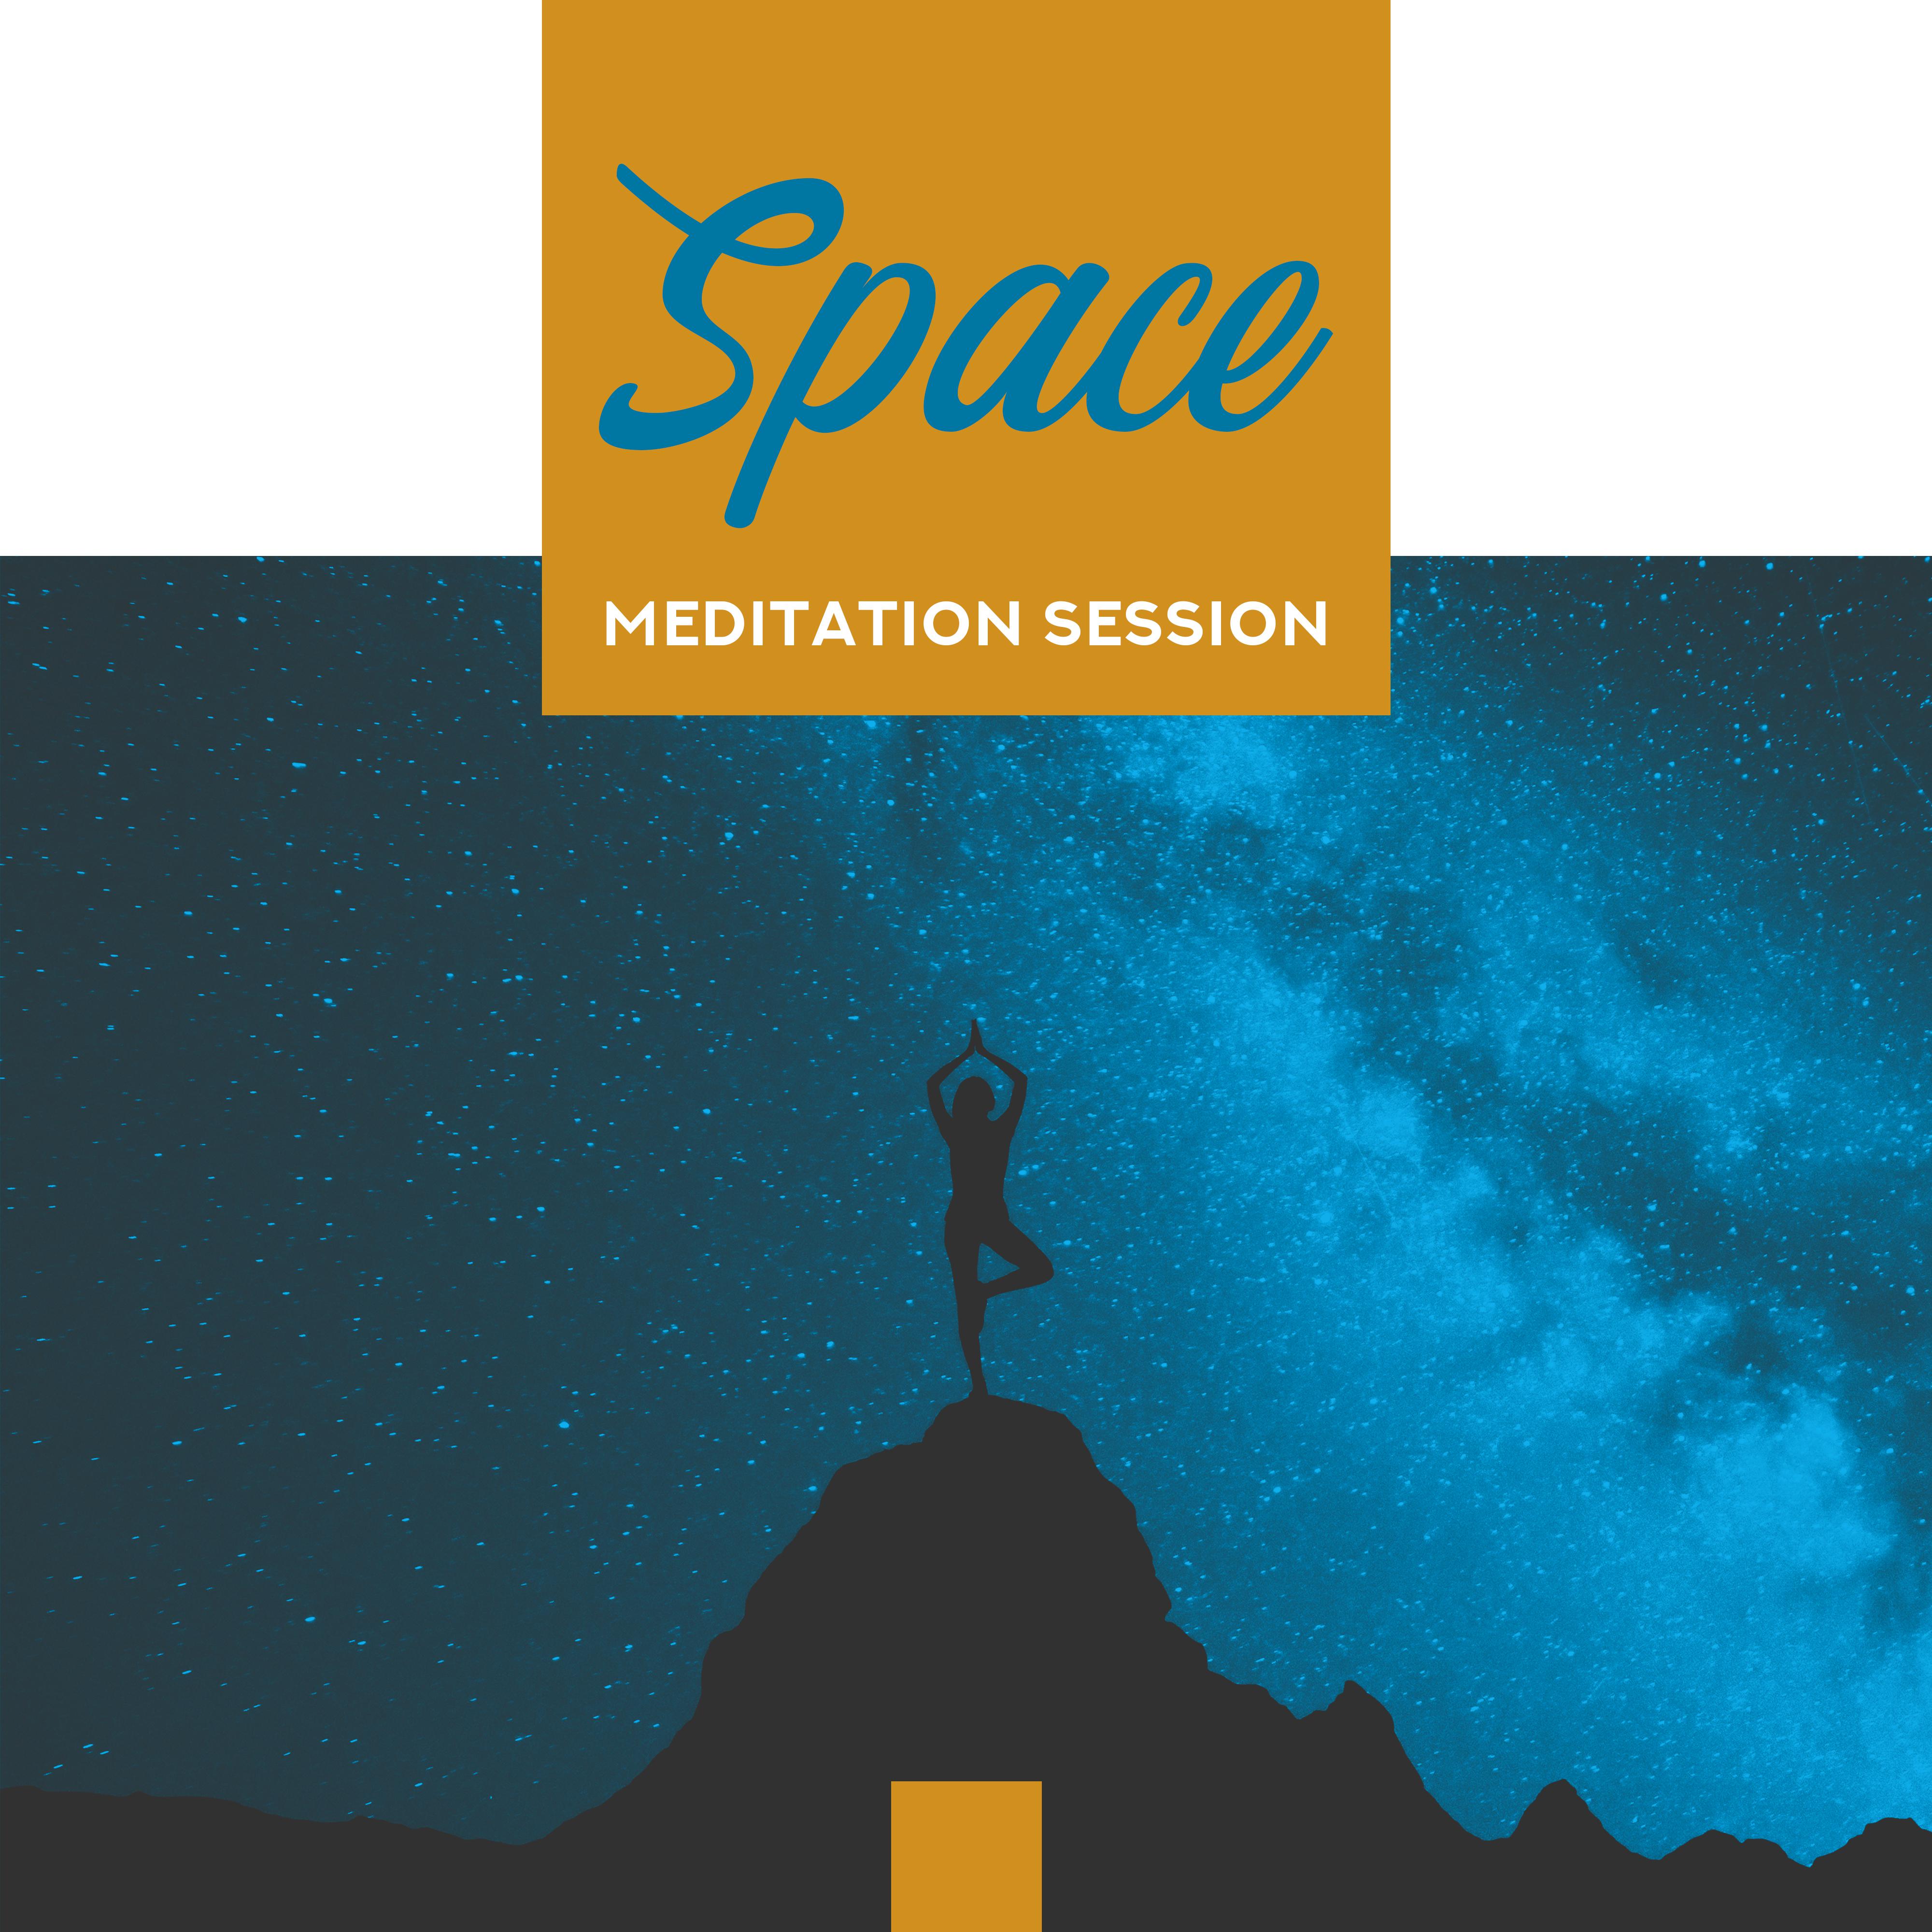 Space Meditation Session: Spiritual Enlightenment, Awakening Chakras and Energy from Space, Calming and Clearing the Mind, Music for Meditation and Yoga Exercises